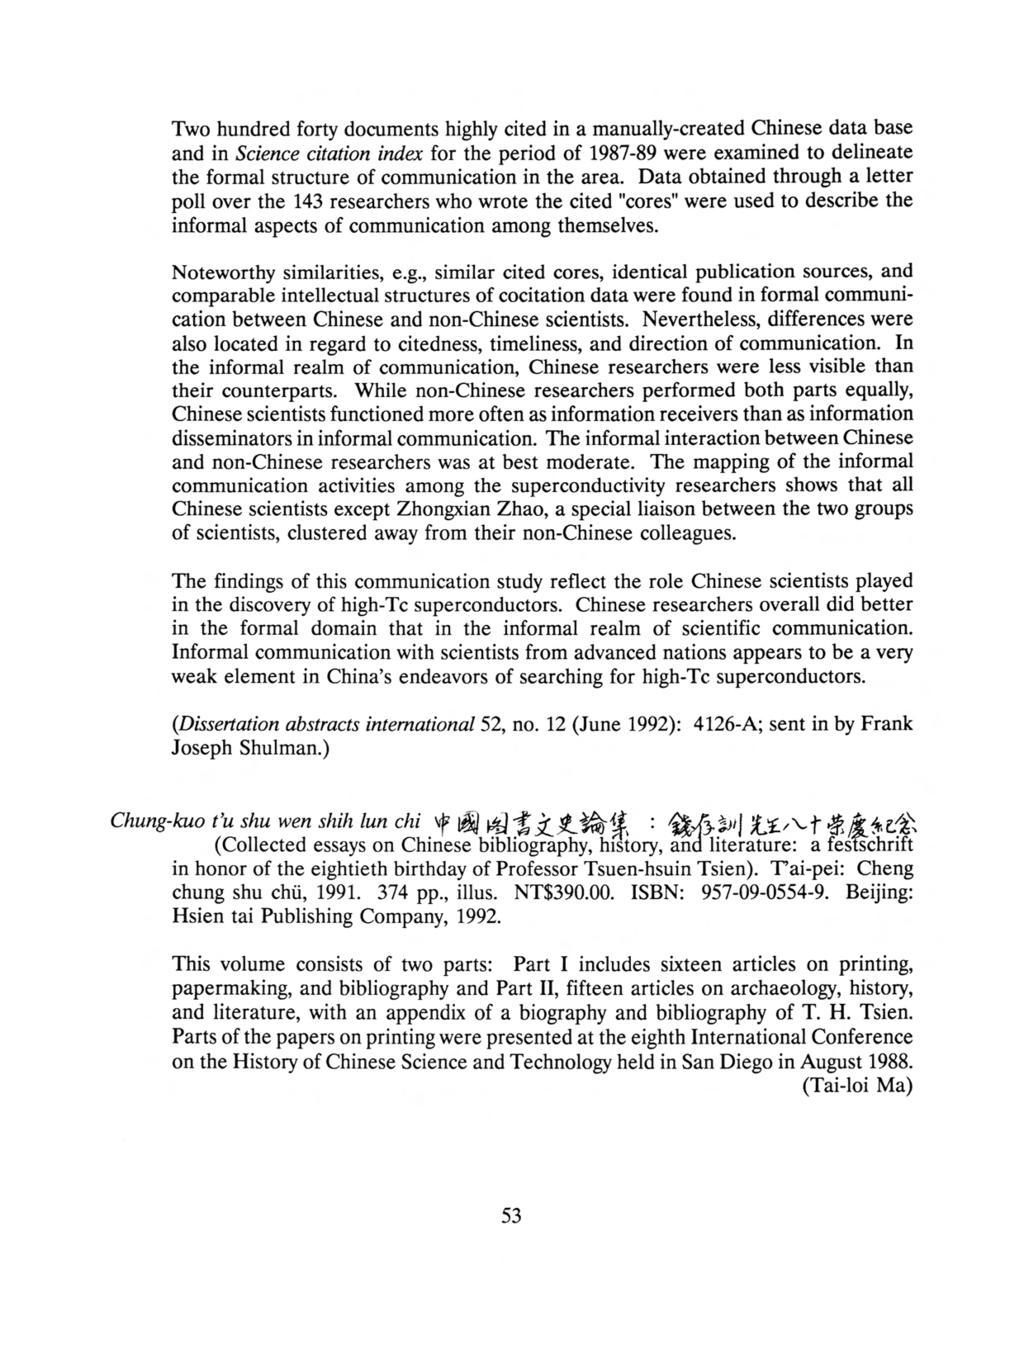 Two hundred forty documents highly cited in a manually-created Chinese data base and in Science citation index for the period of 1987-89 were examined to delineate the formal structure of